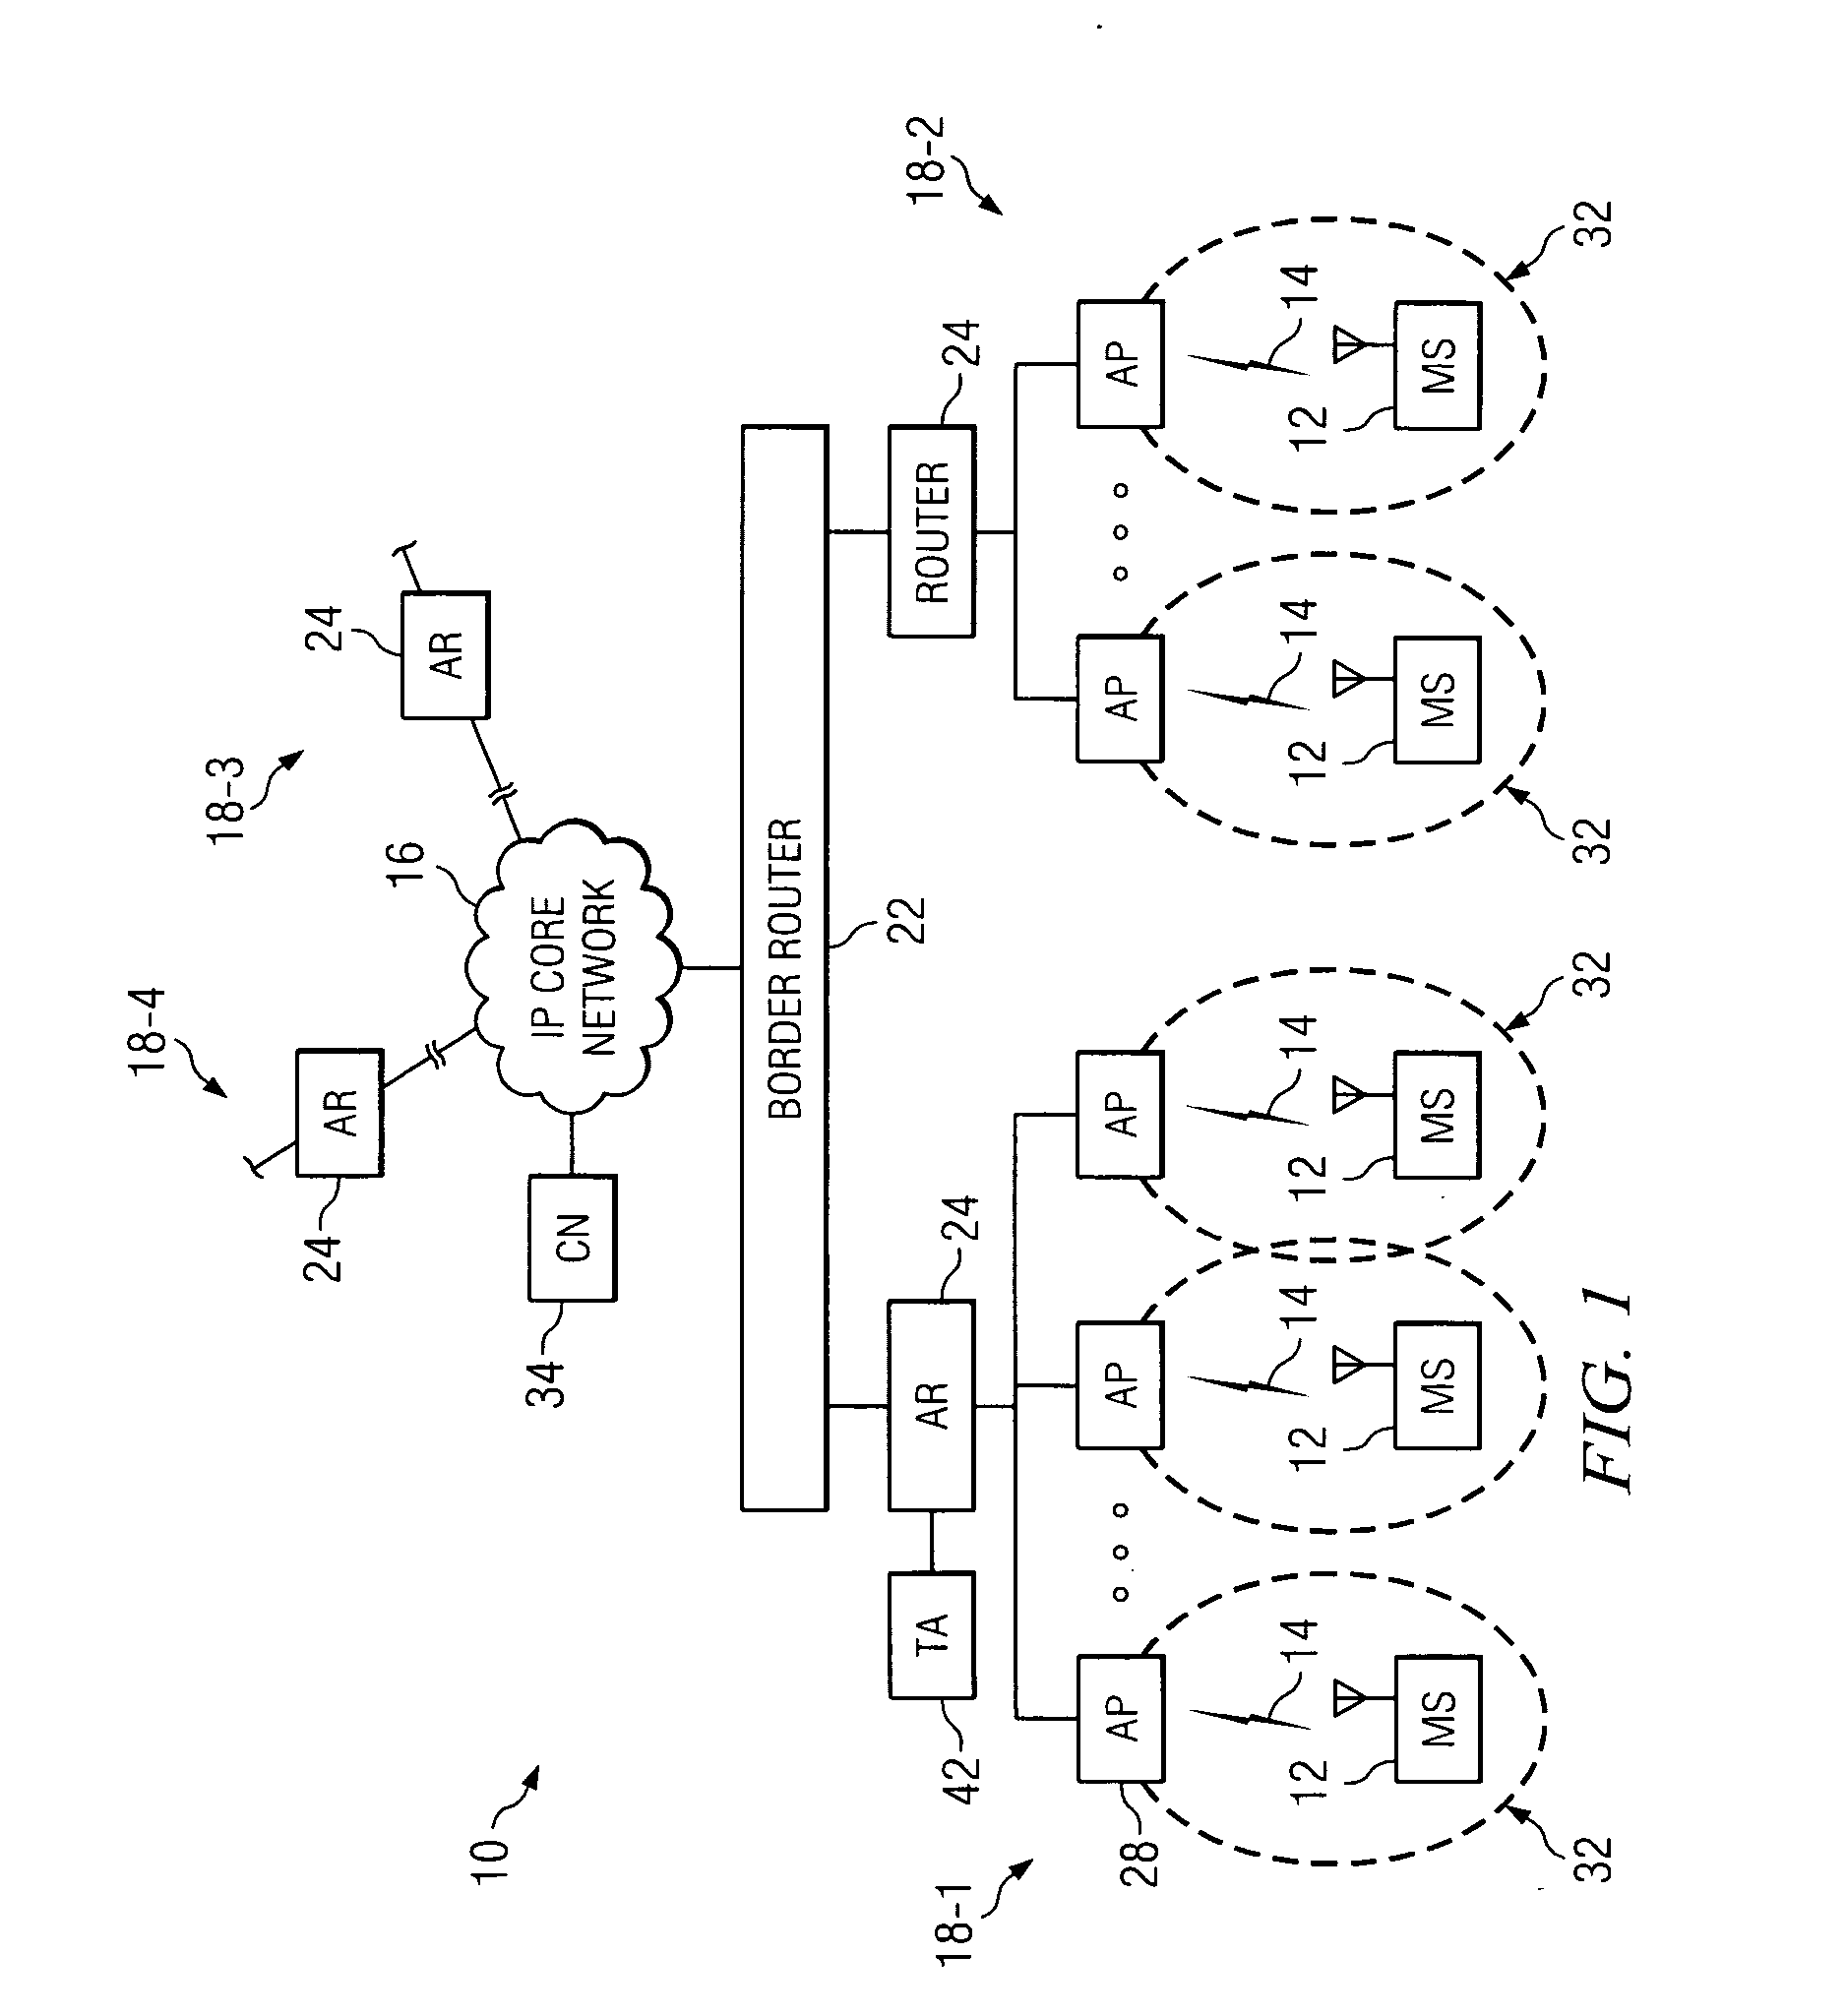 Apparatus, and an associated method, for performing link layer paging of a mobile station operable in a radio communication system